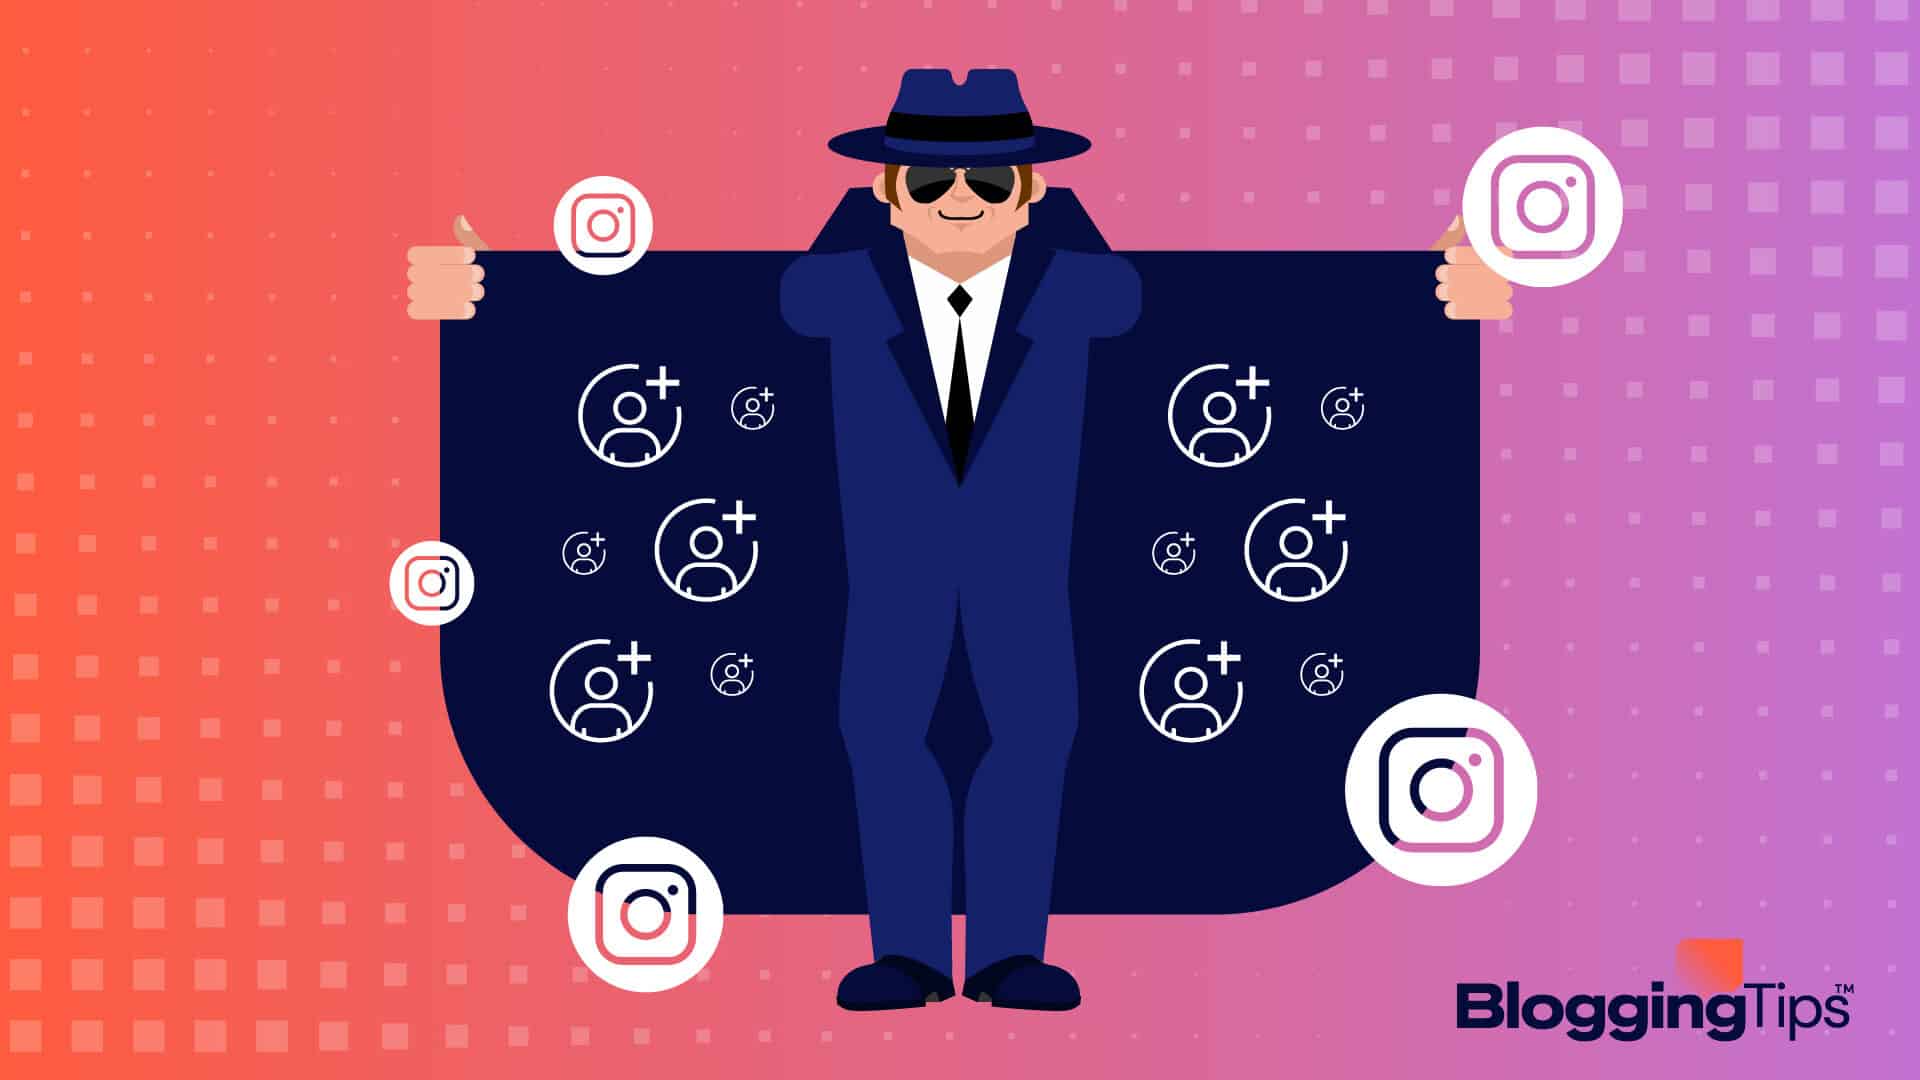 vector graphic showing an illustration of a man showing how to buy Instagram followers